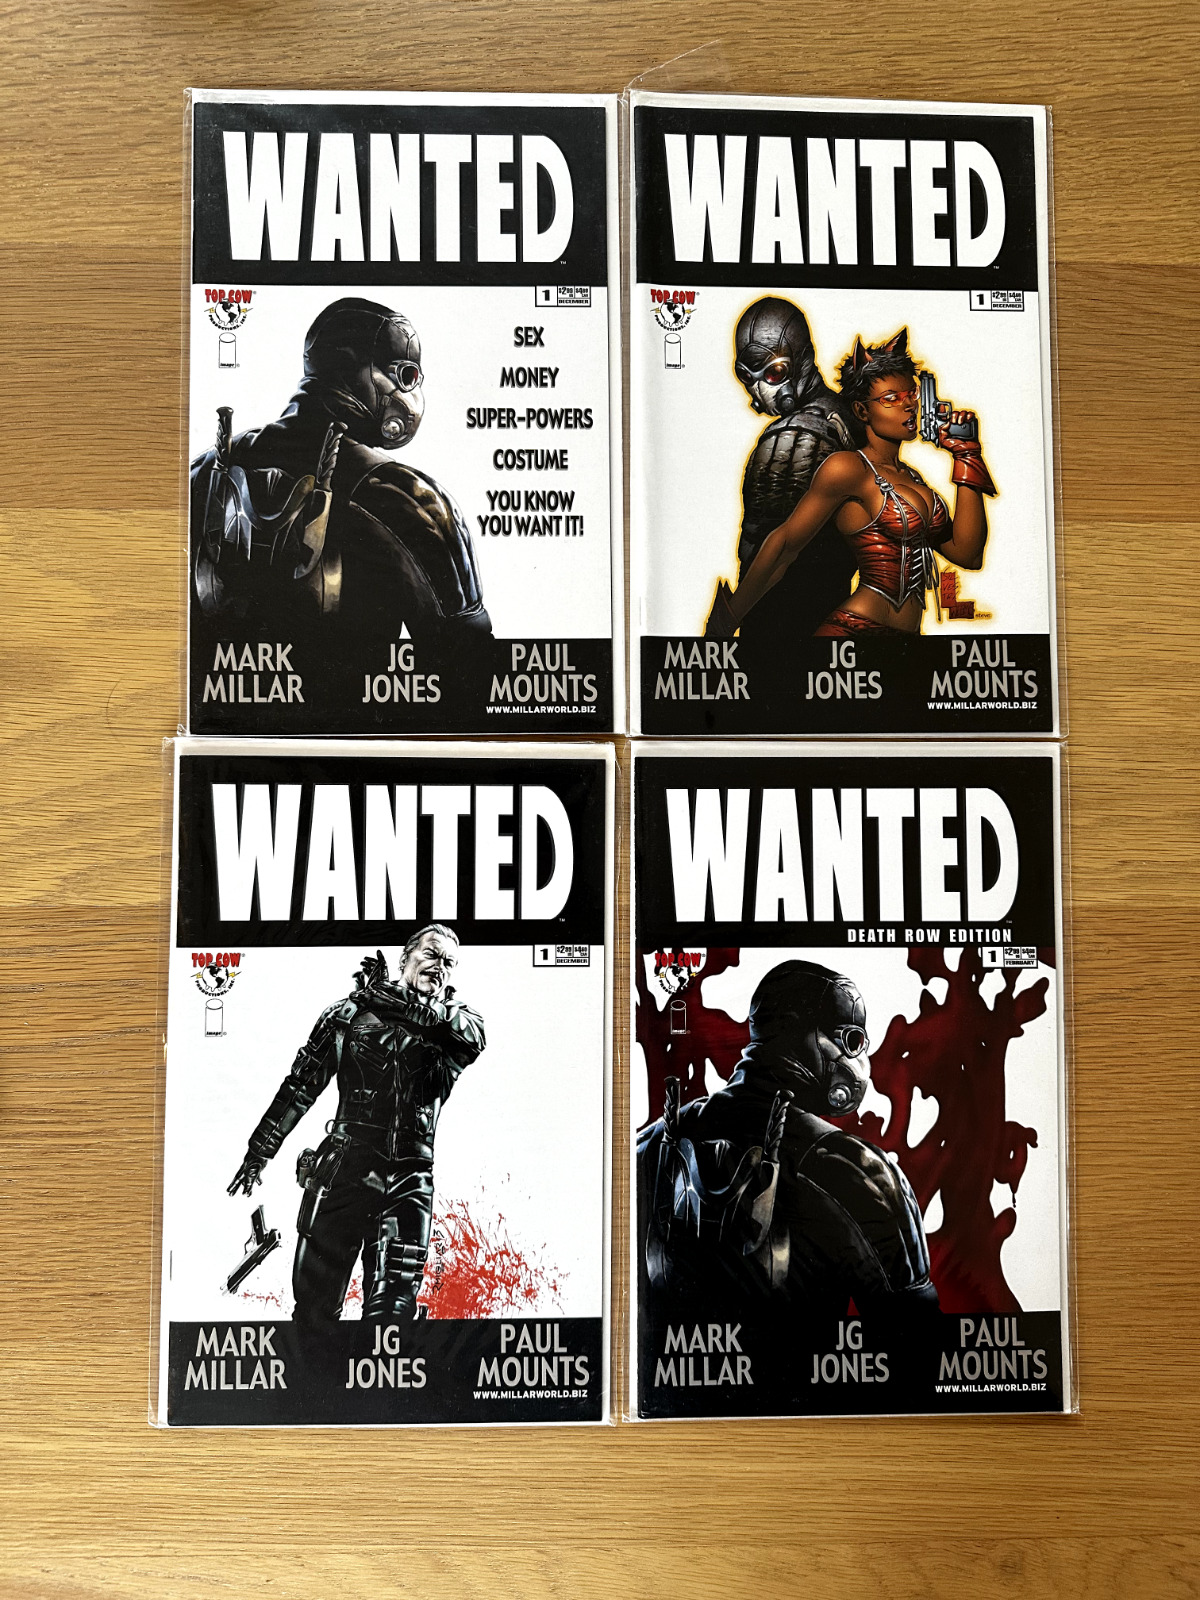 WANTED (Top Cow, 2003) - #1 - 6 Complete + Dossier + Variant Covers + Death Row